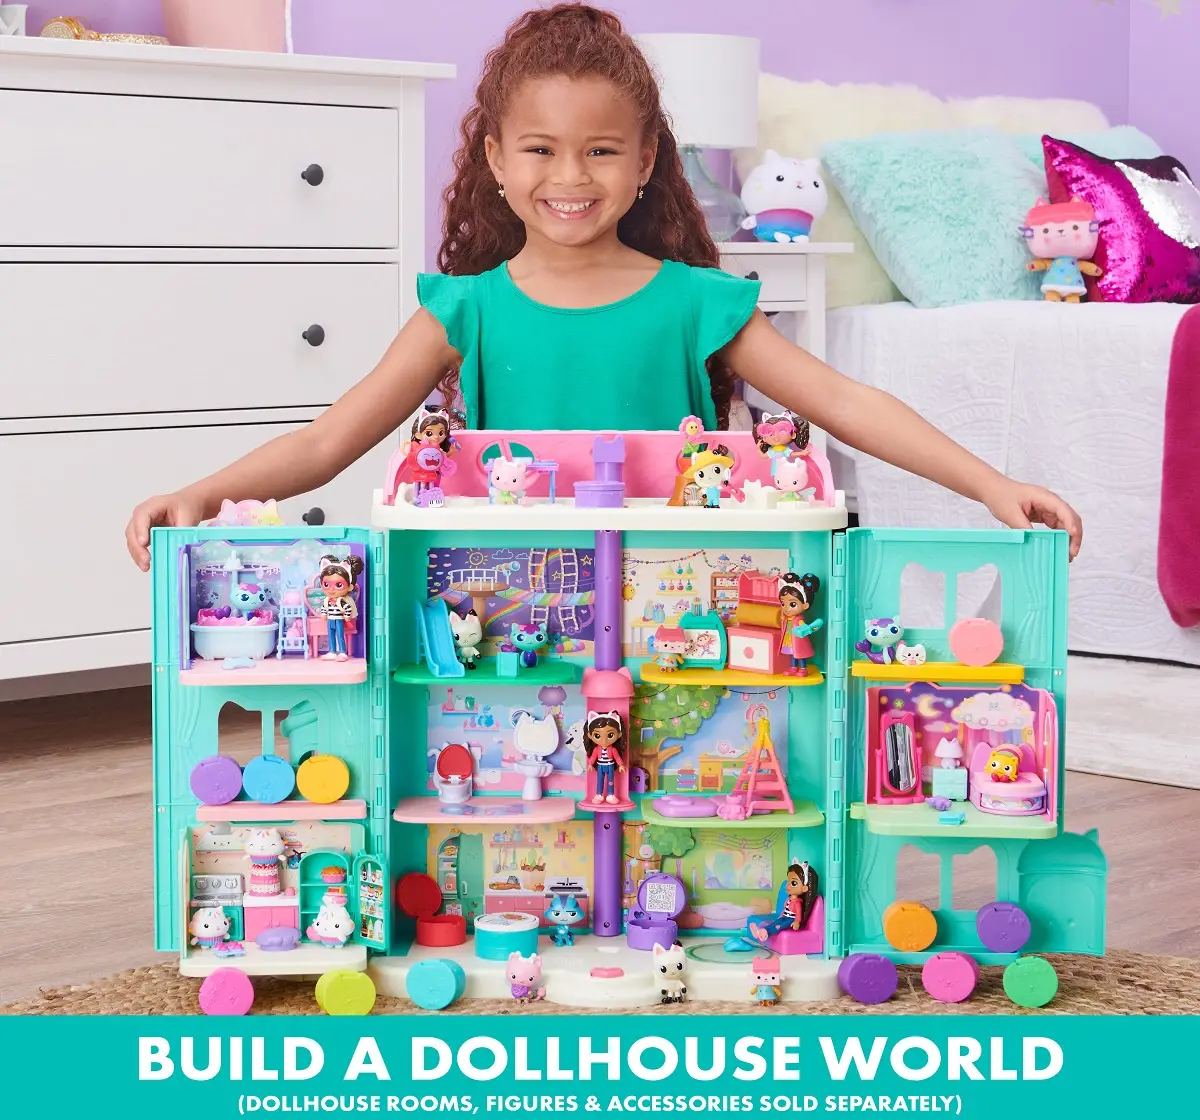 Gabbys Dollhouse, Purrfect Dollhouse with 2 Toy Figures, 8 Furniture Pieces, 3 Accessories, 2 Deliveries and Sounds, Kids Toys for Ages 3 and up